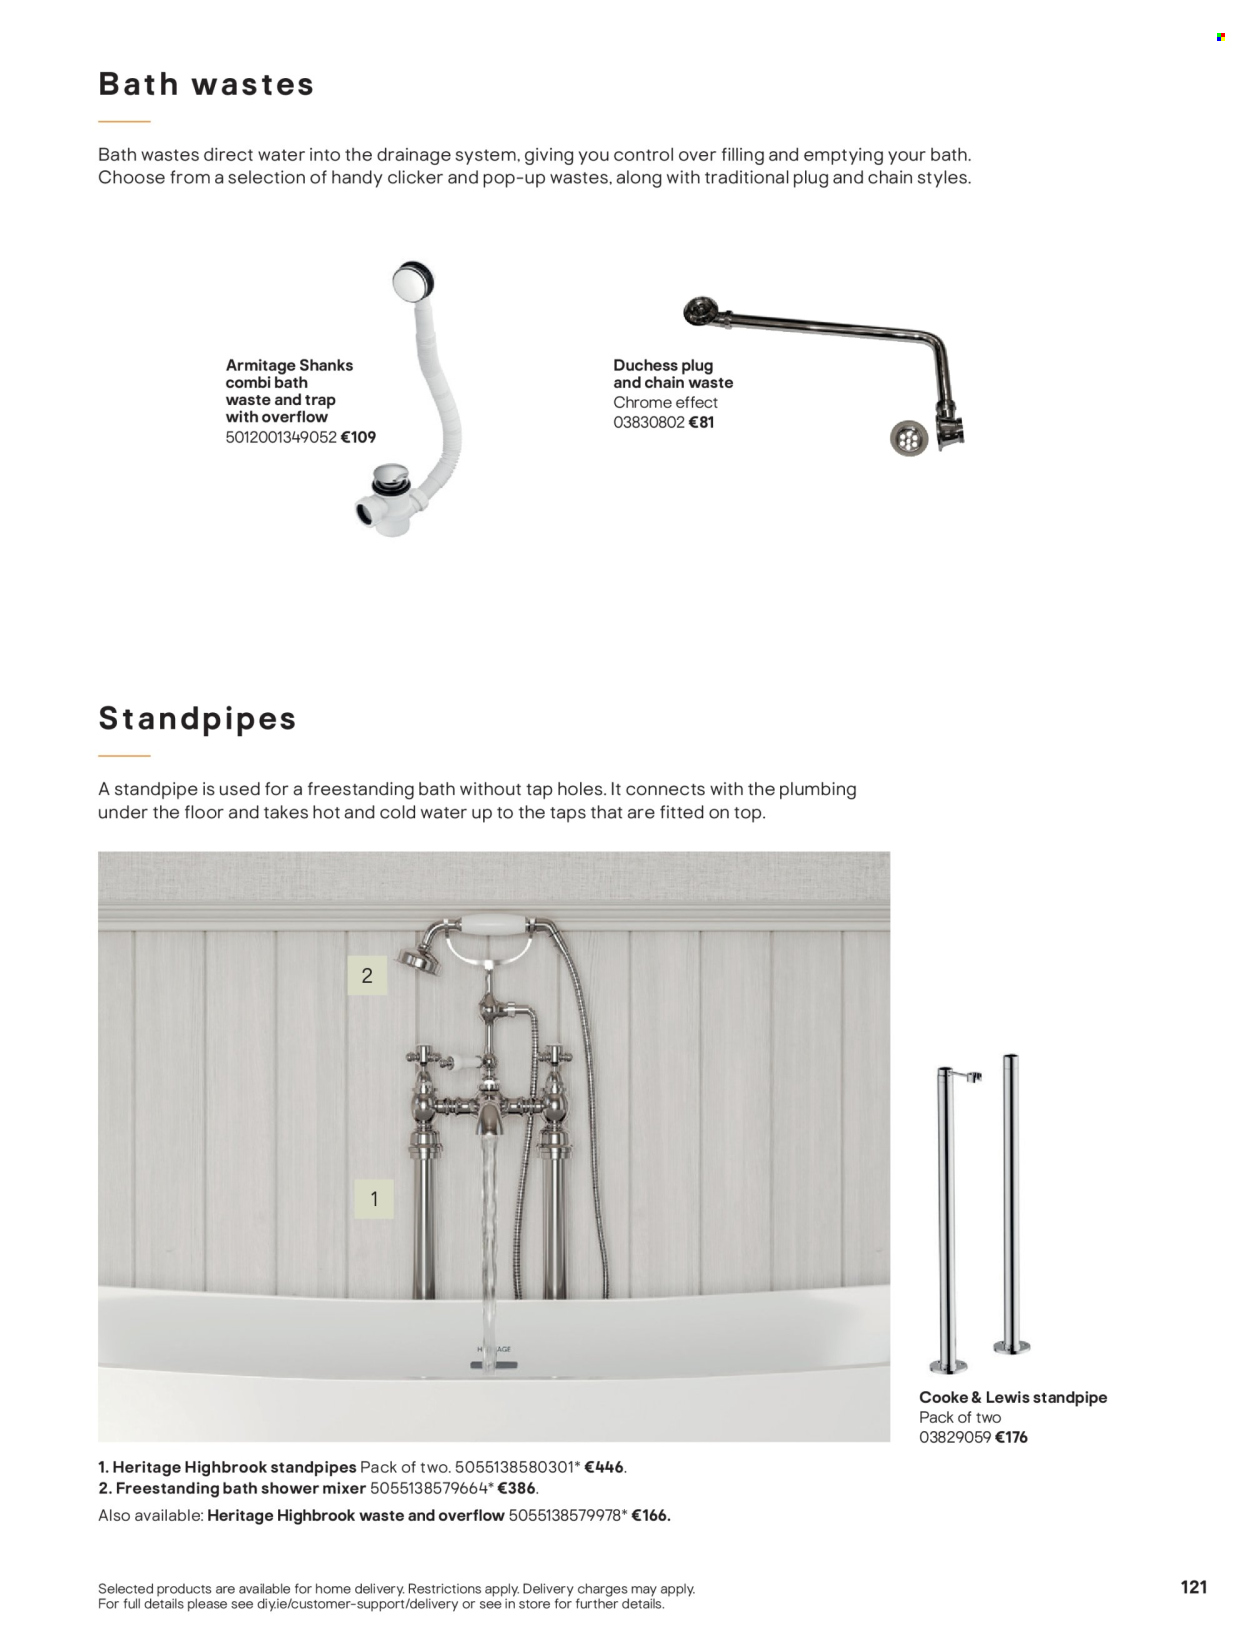 thumbnail - B&Q offer  - Sales products - shower mixer. Page 121.